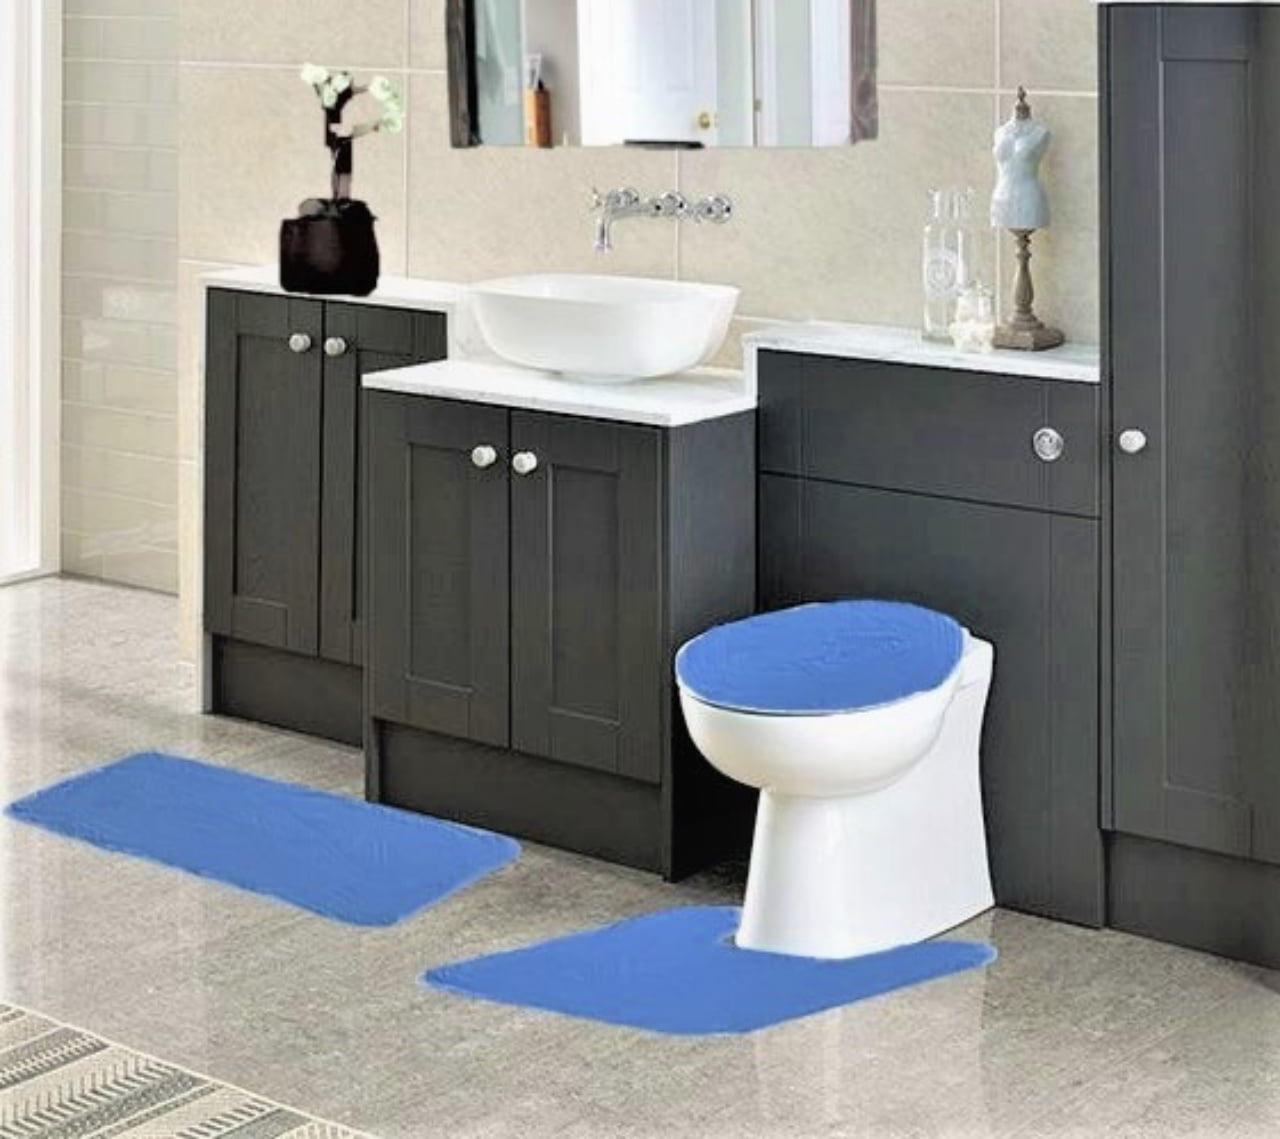 Contour With Rubb And Toilet Lid Cover S 3Pc Silver Bathroom Set Bath Mat Rug 